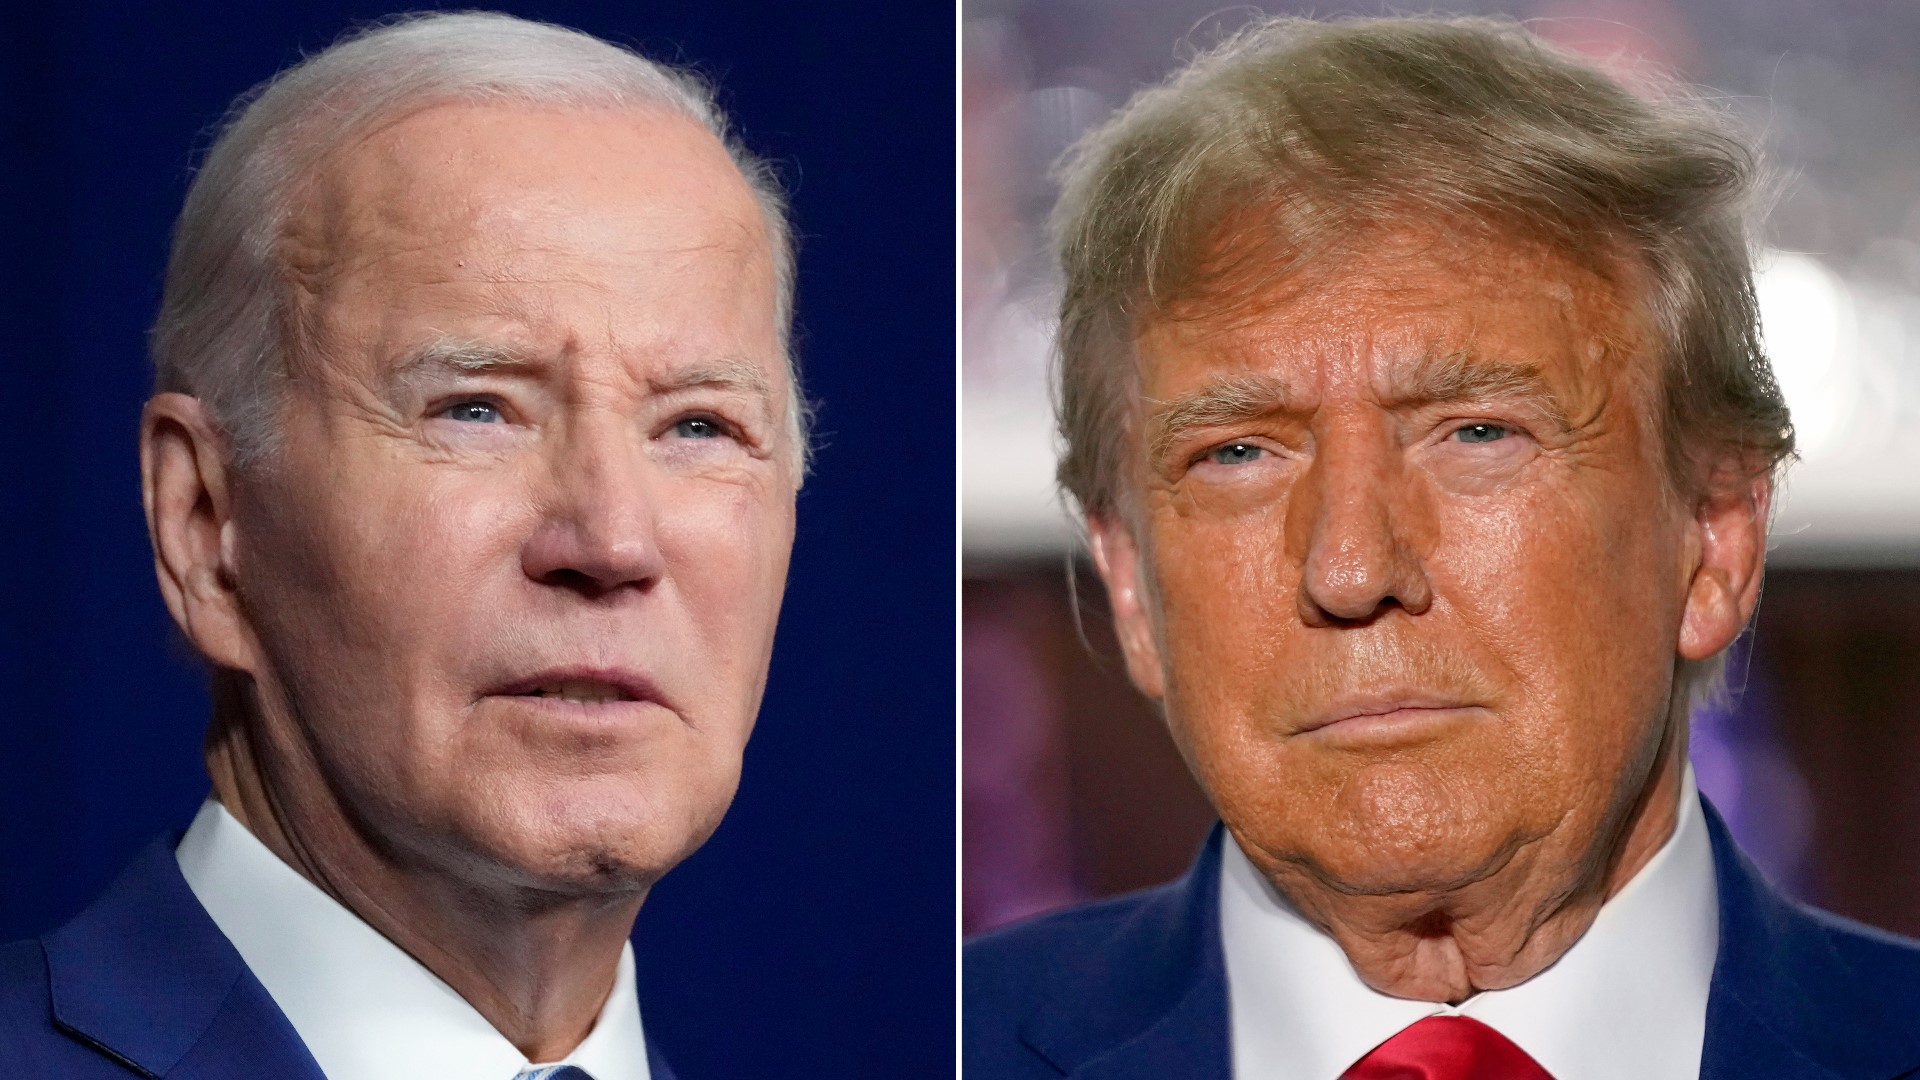 After multiple state primaries, President Biden and Donald Trump have the delegates to obtain their parties' nominations, and Iowa drops its lawsuit against the EPA.